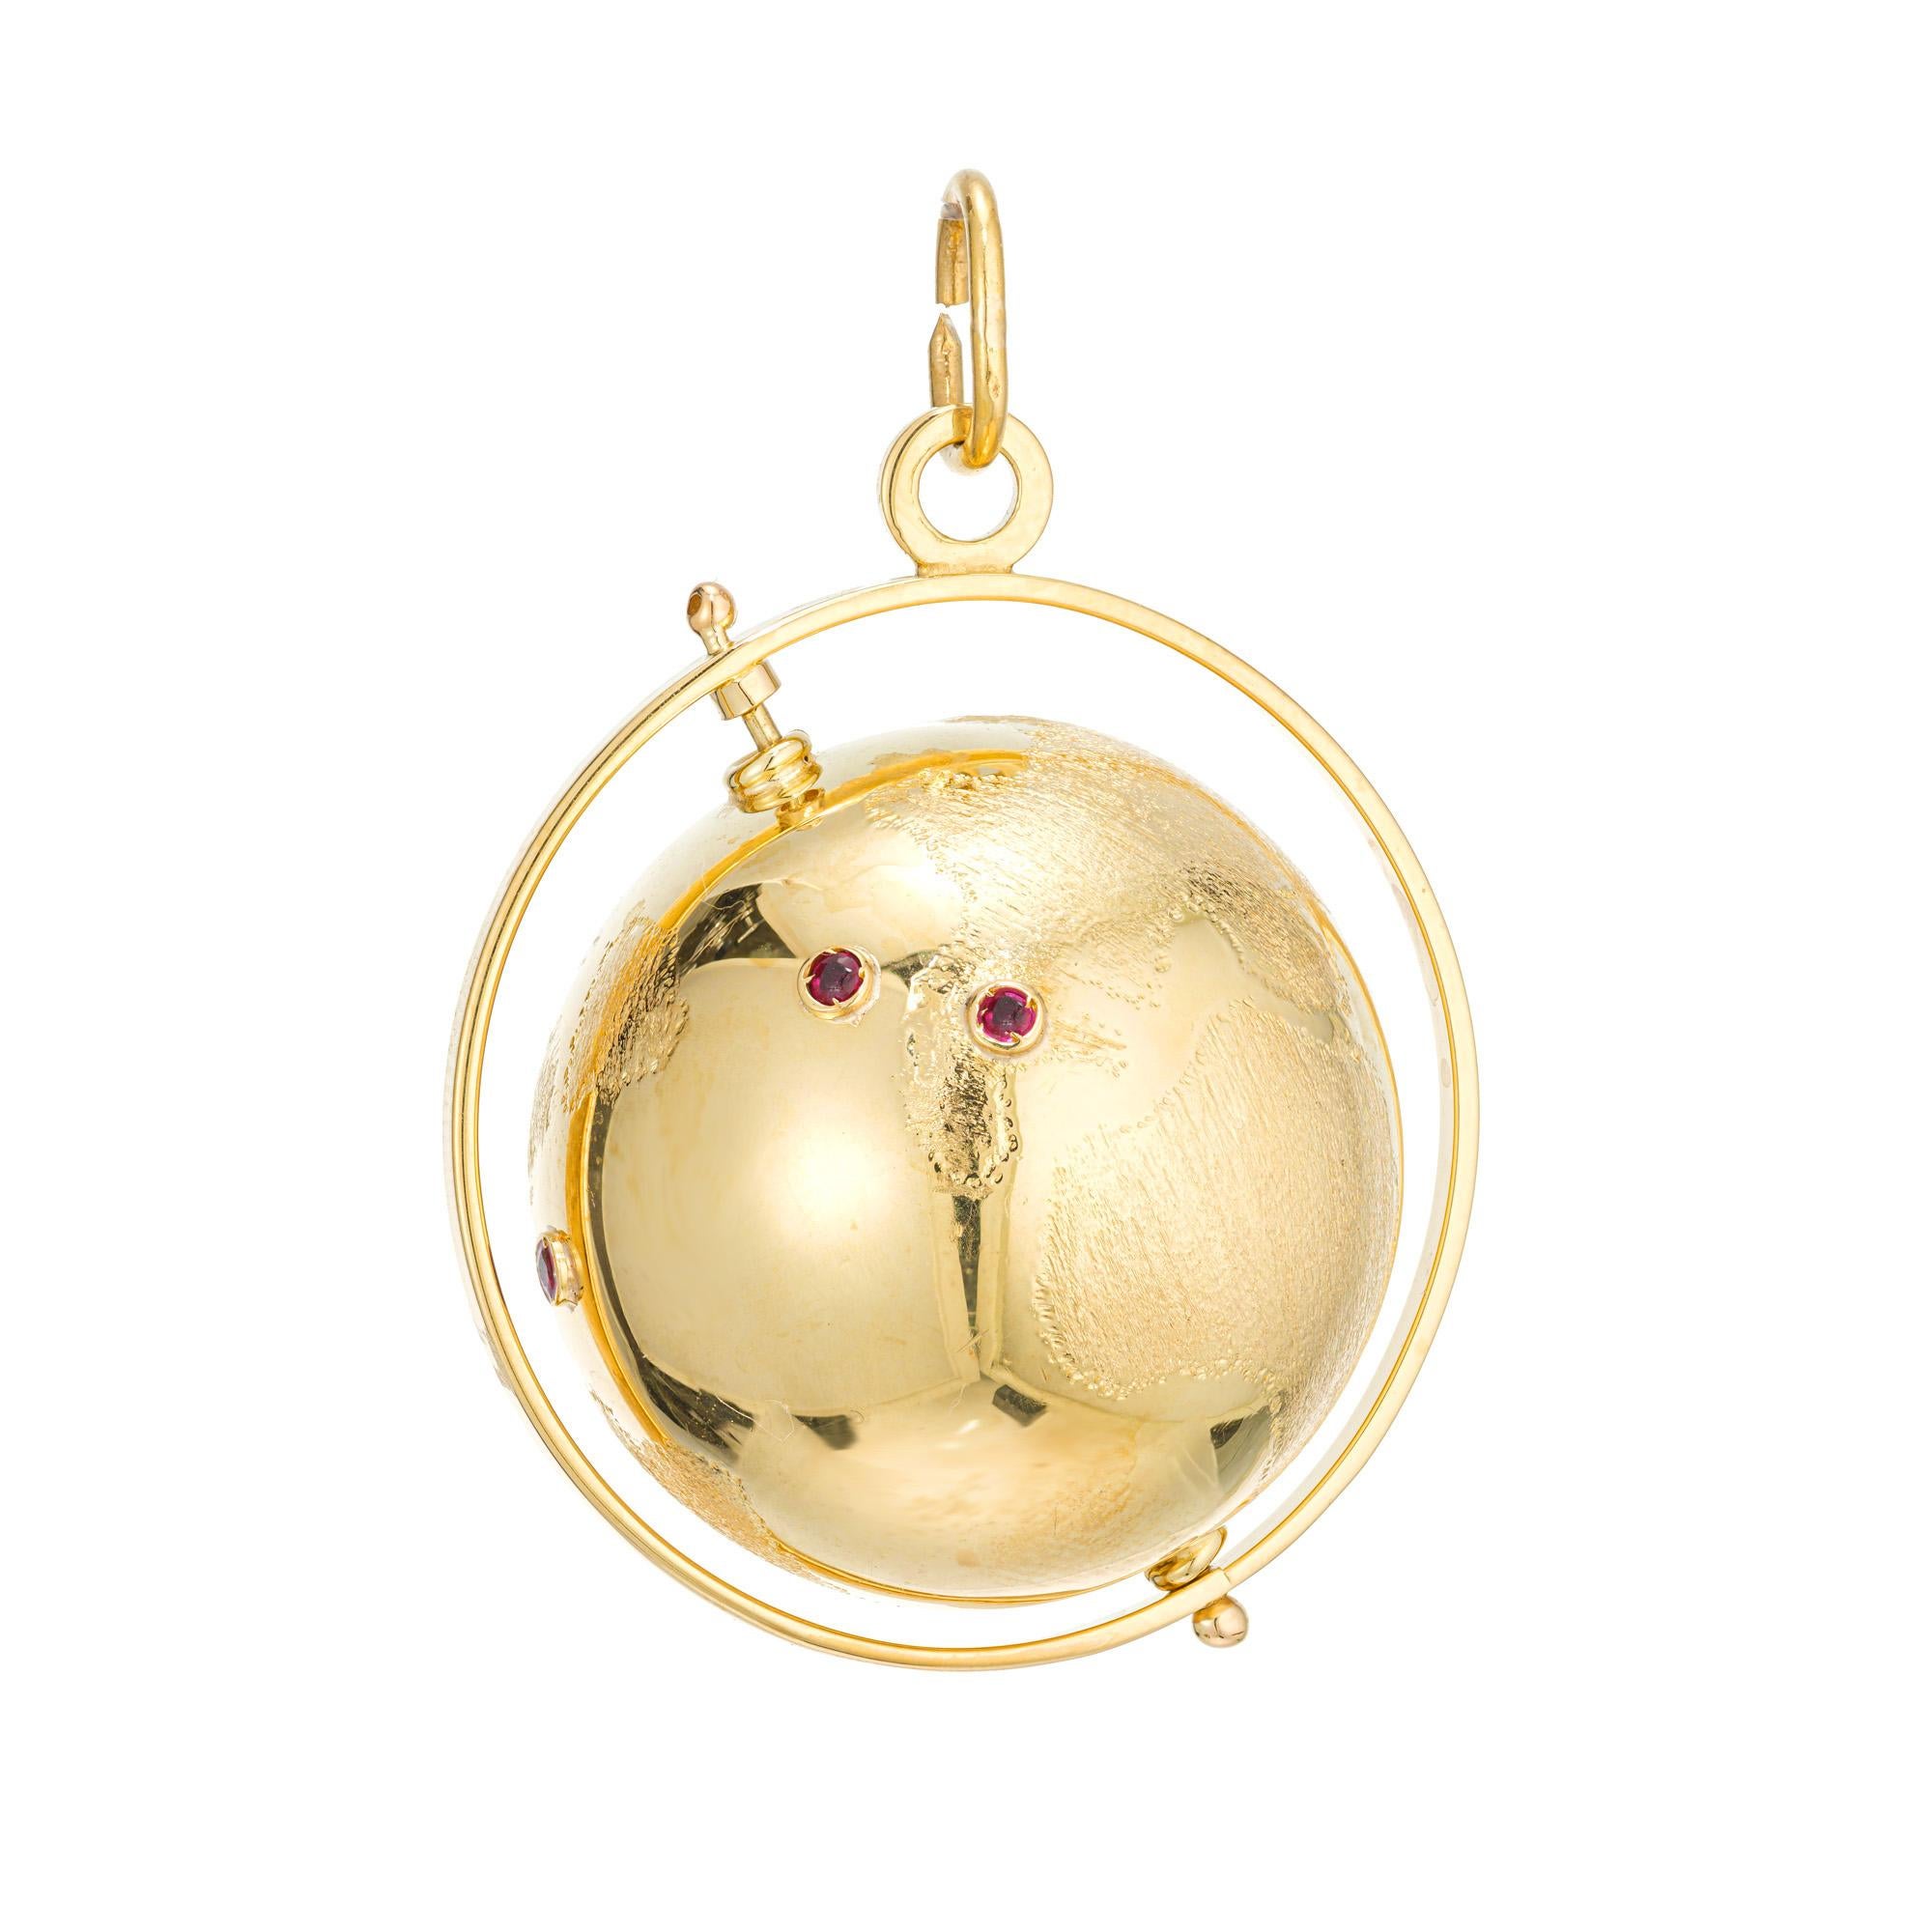 1960's Three Dimensional 18k yellow gold spinning globe charm with engraved continents and ruby accents.

4 round red rubies, approx. .8cts
18k yellow gold 
Tested: 18k
9.7 grams
Top to bottom: 42.42mm or 1.61 Inches
Width: 30mm or 1.2 Inches
Depth